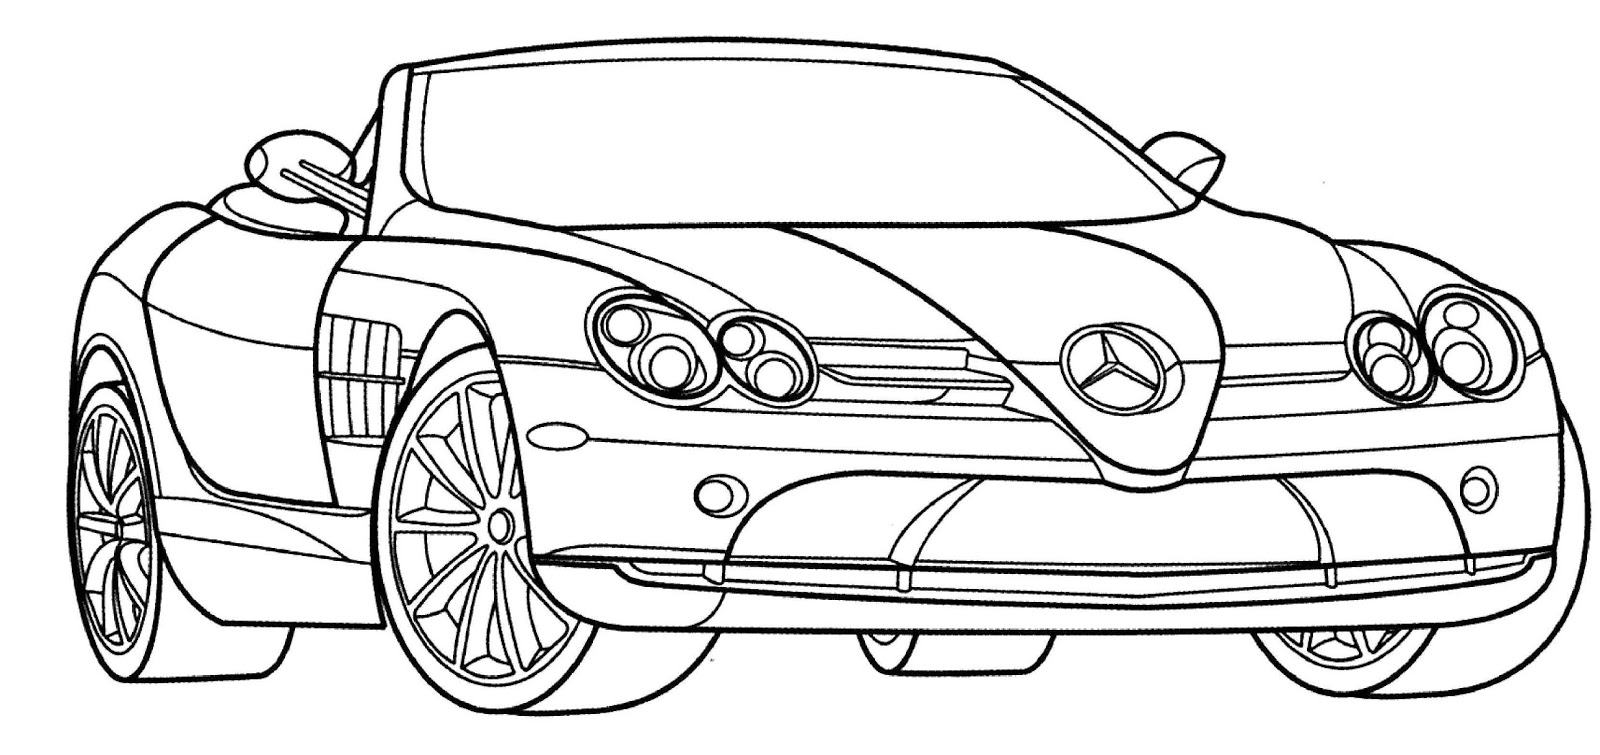 Coloring Pages For Kids Cars | Rainbow Coloring